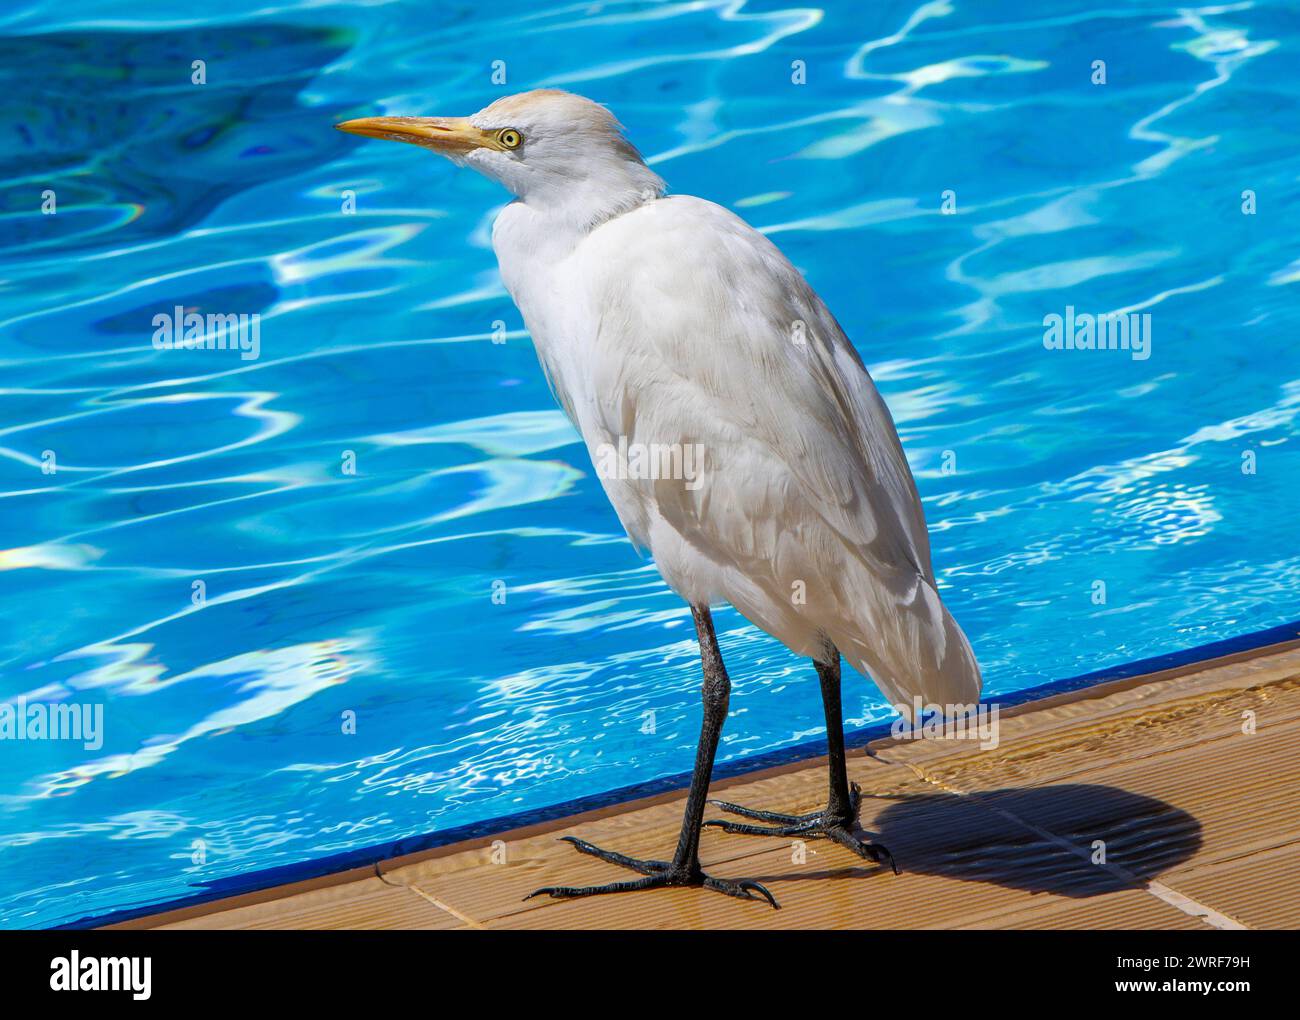 The cattle egret (Bubulcus), a genus of heron (family Ardeidae), stands by a swimming pool in Egypt. Stock Photo